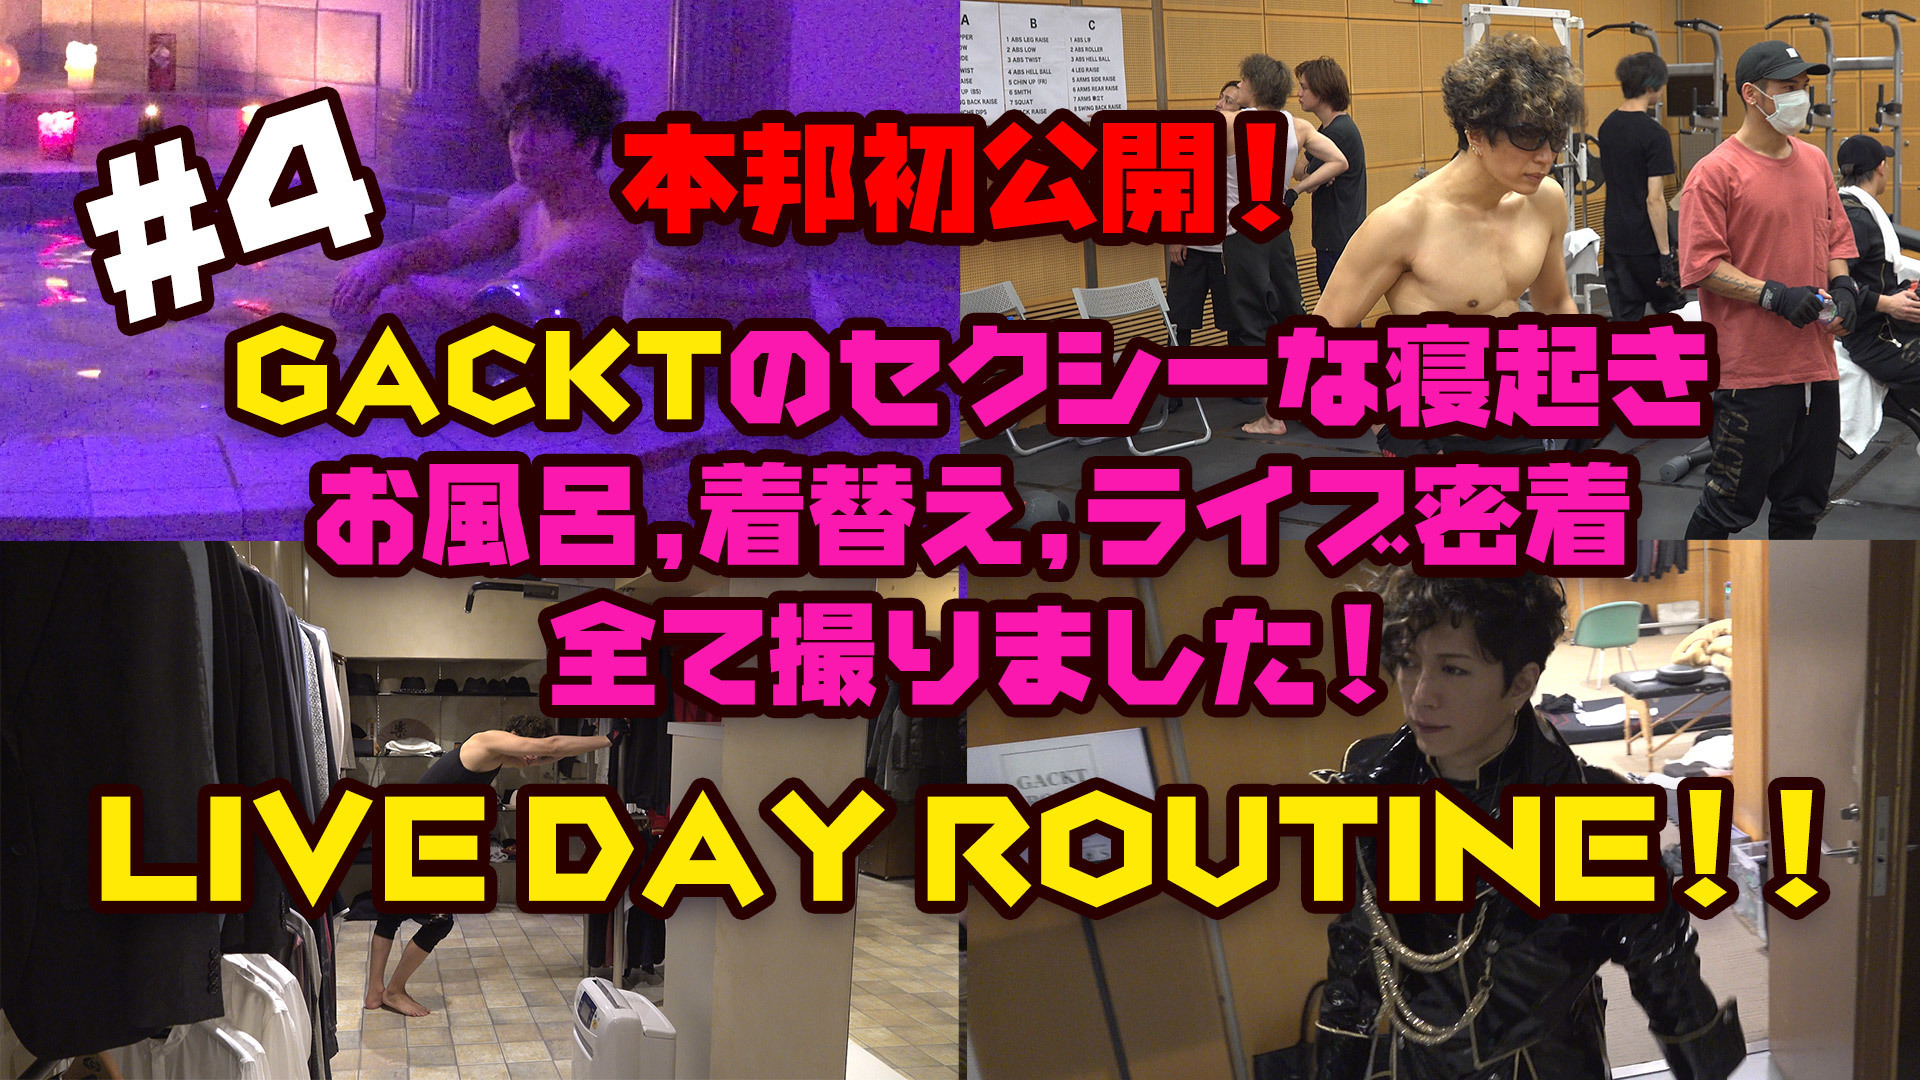 Gackt Official Youtube がくちゃん 4 配信開始 Gackt Official Website